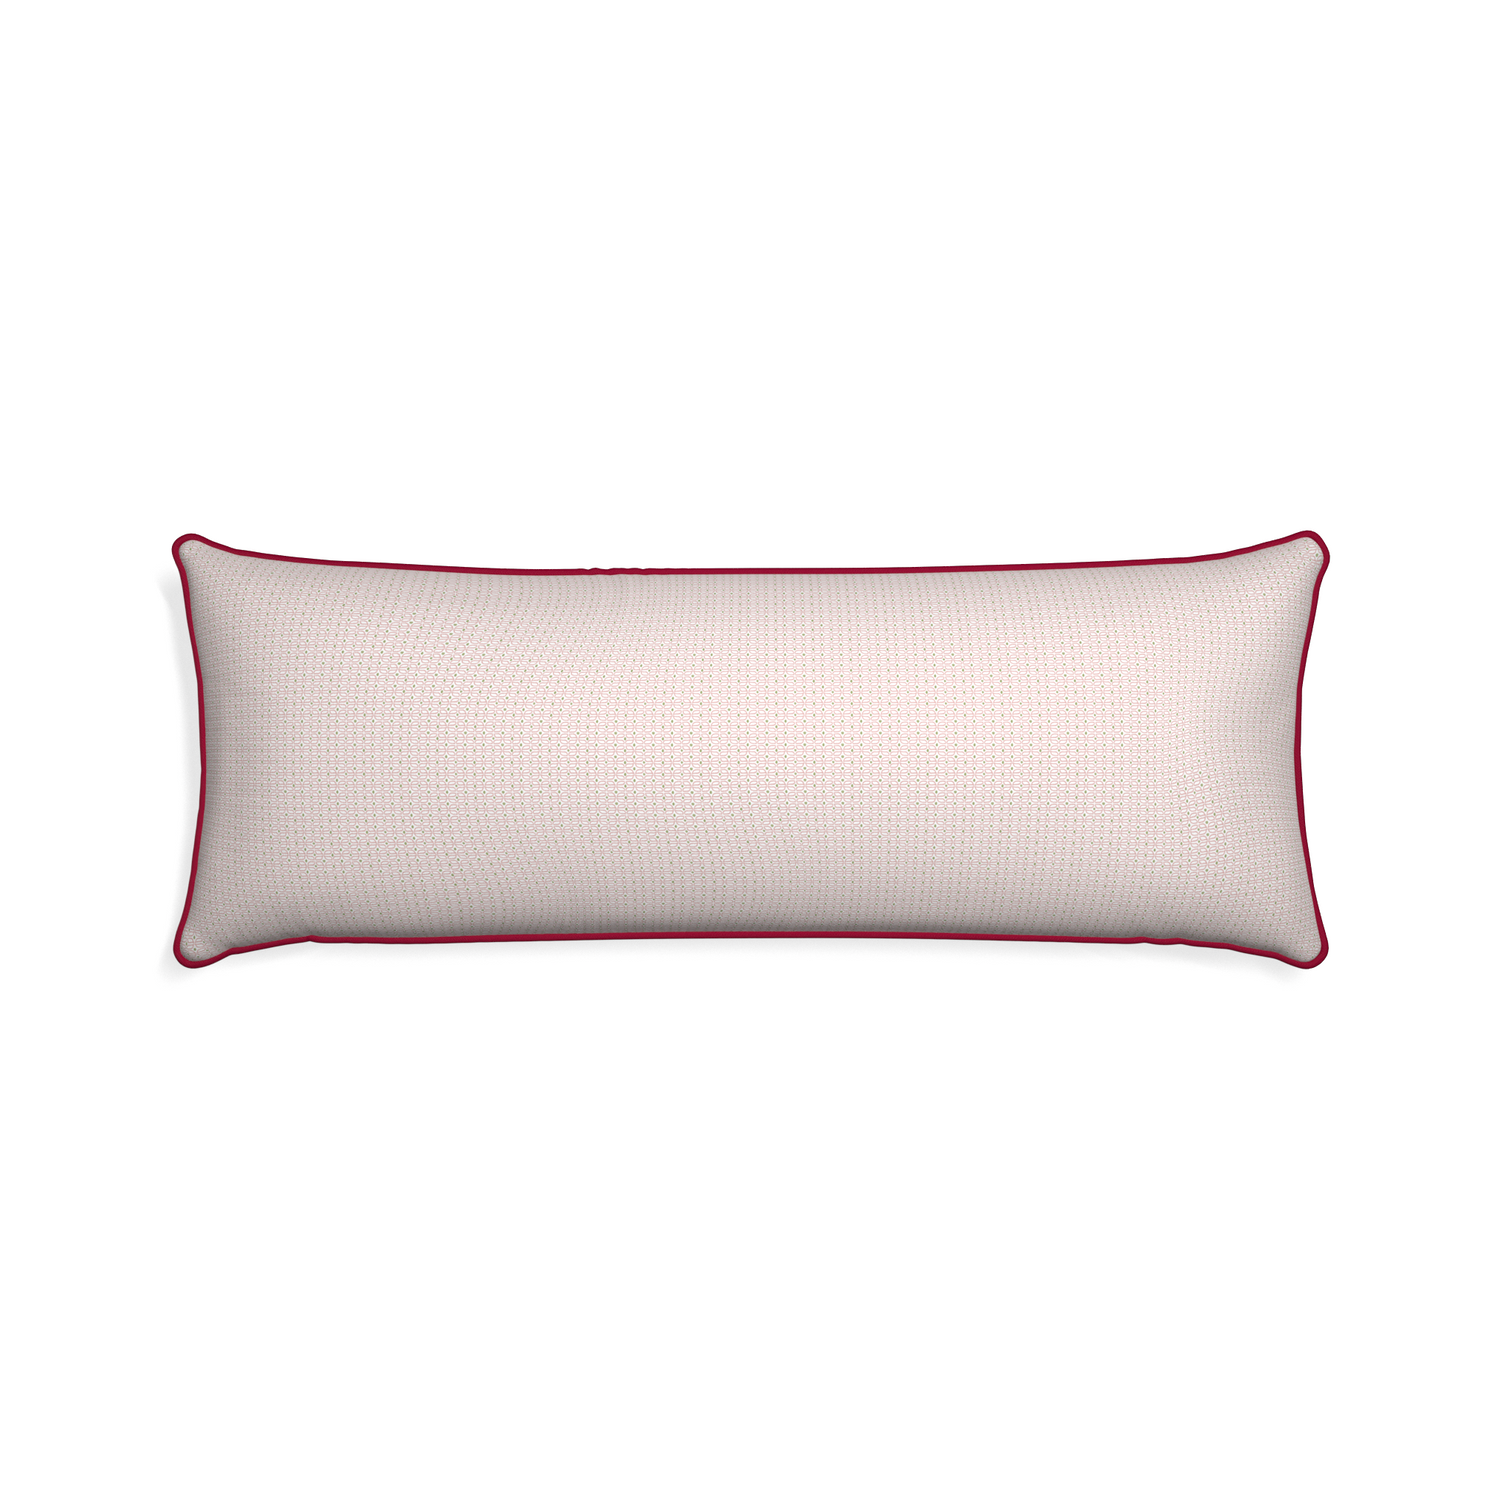 Xl-lumbar loomi pink custom pink geometricpillow with raspberry piping on white background